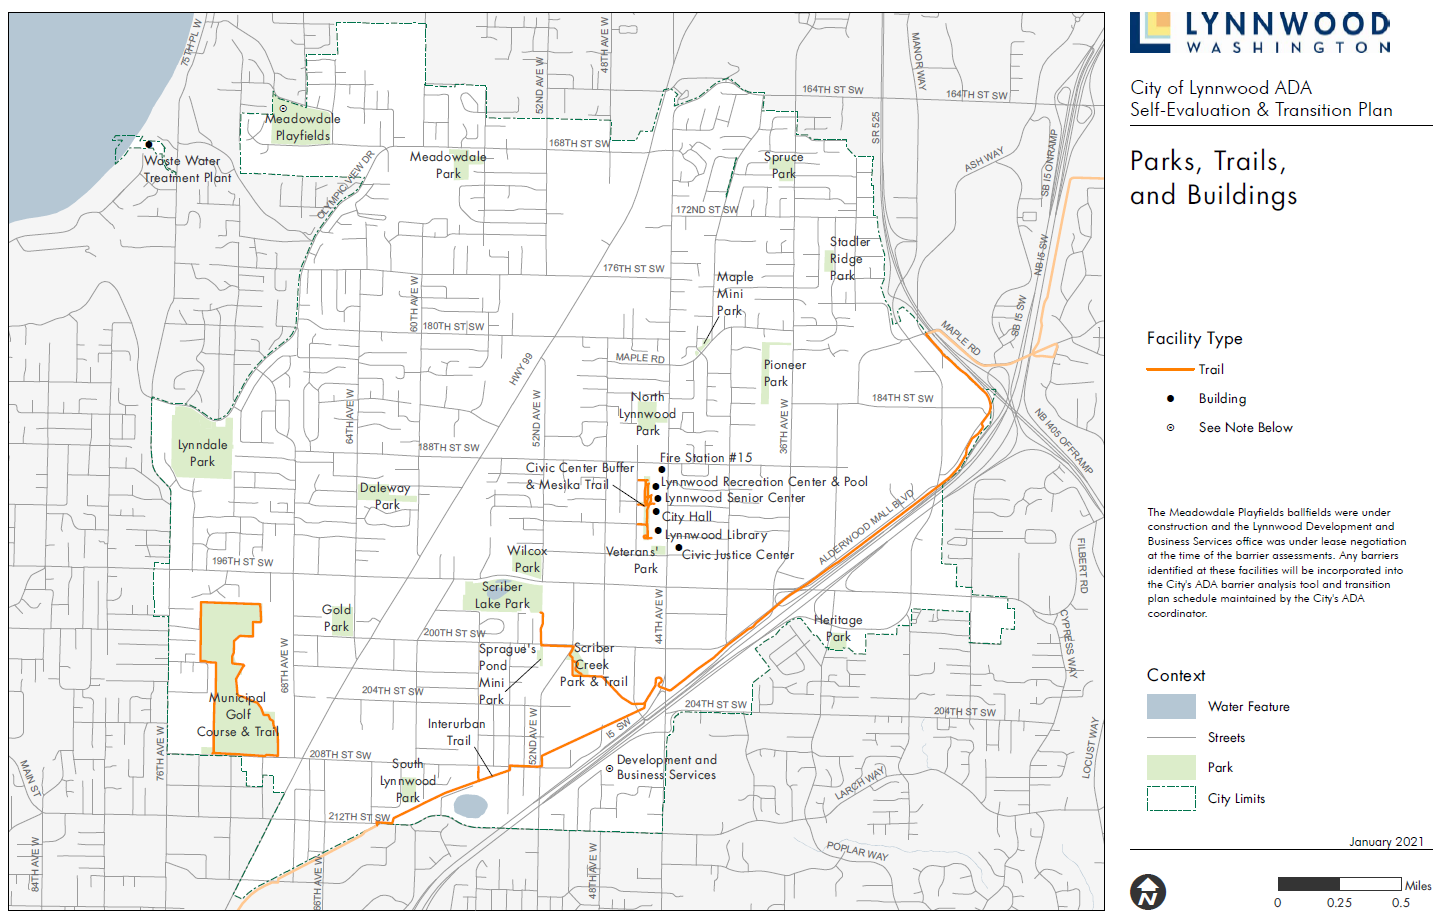 City-of-Lynnwood-Parks-Trails-and-Buildings-Map-2021.png